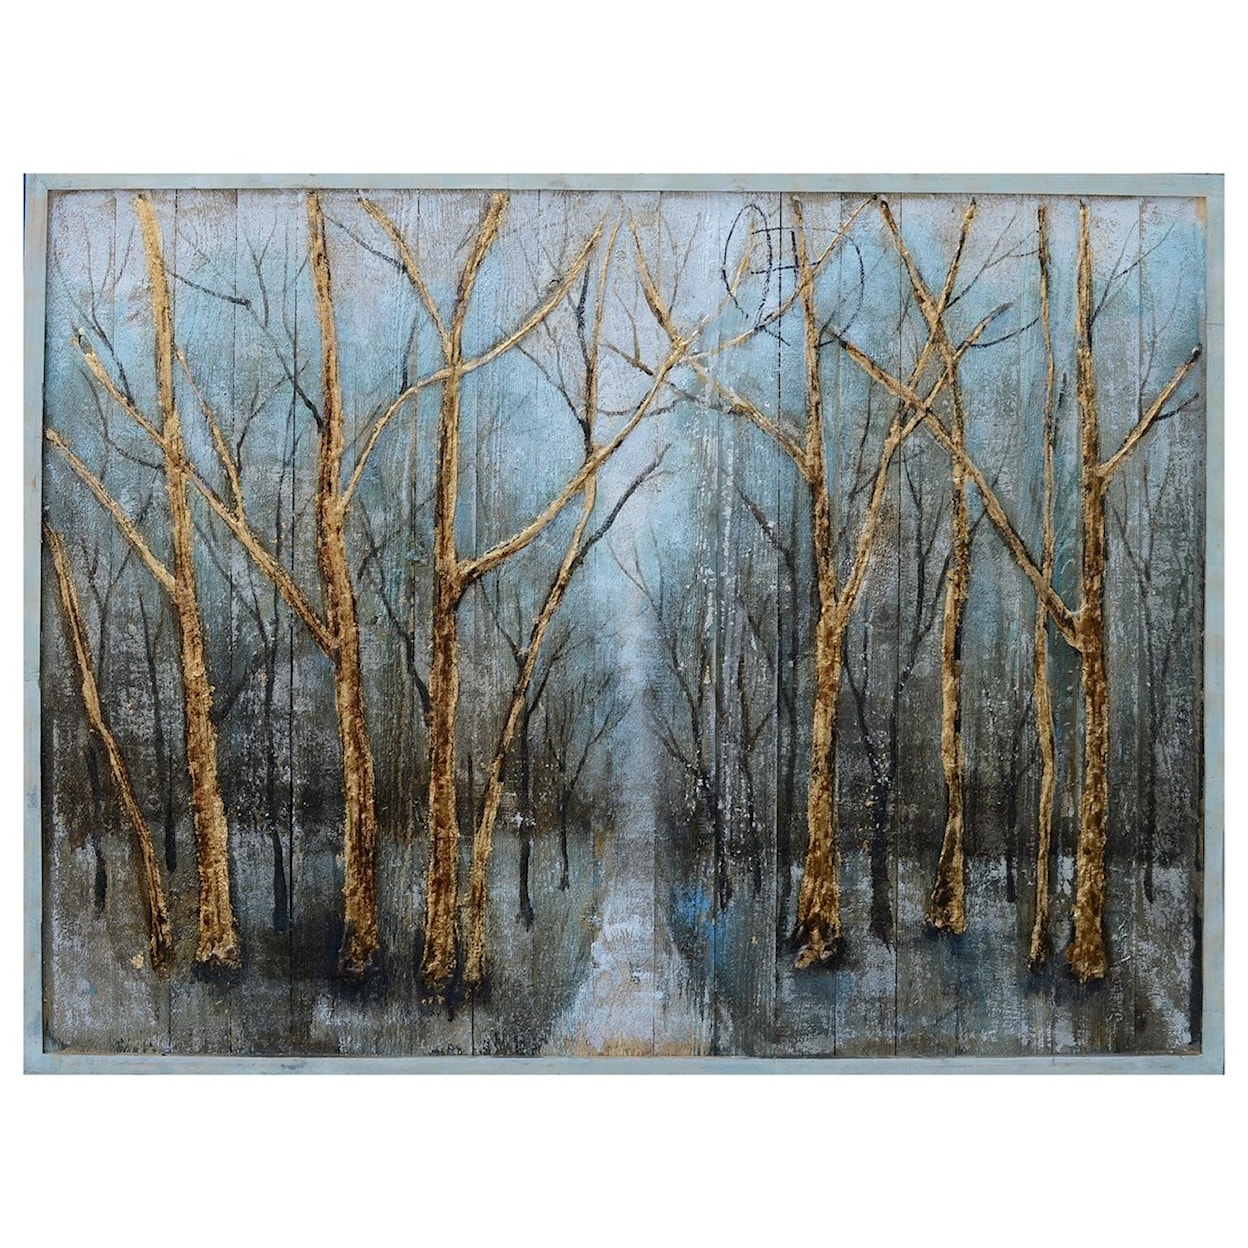 Crestview Collection Prints and Paintings Hand Painting on Wood